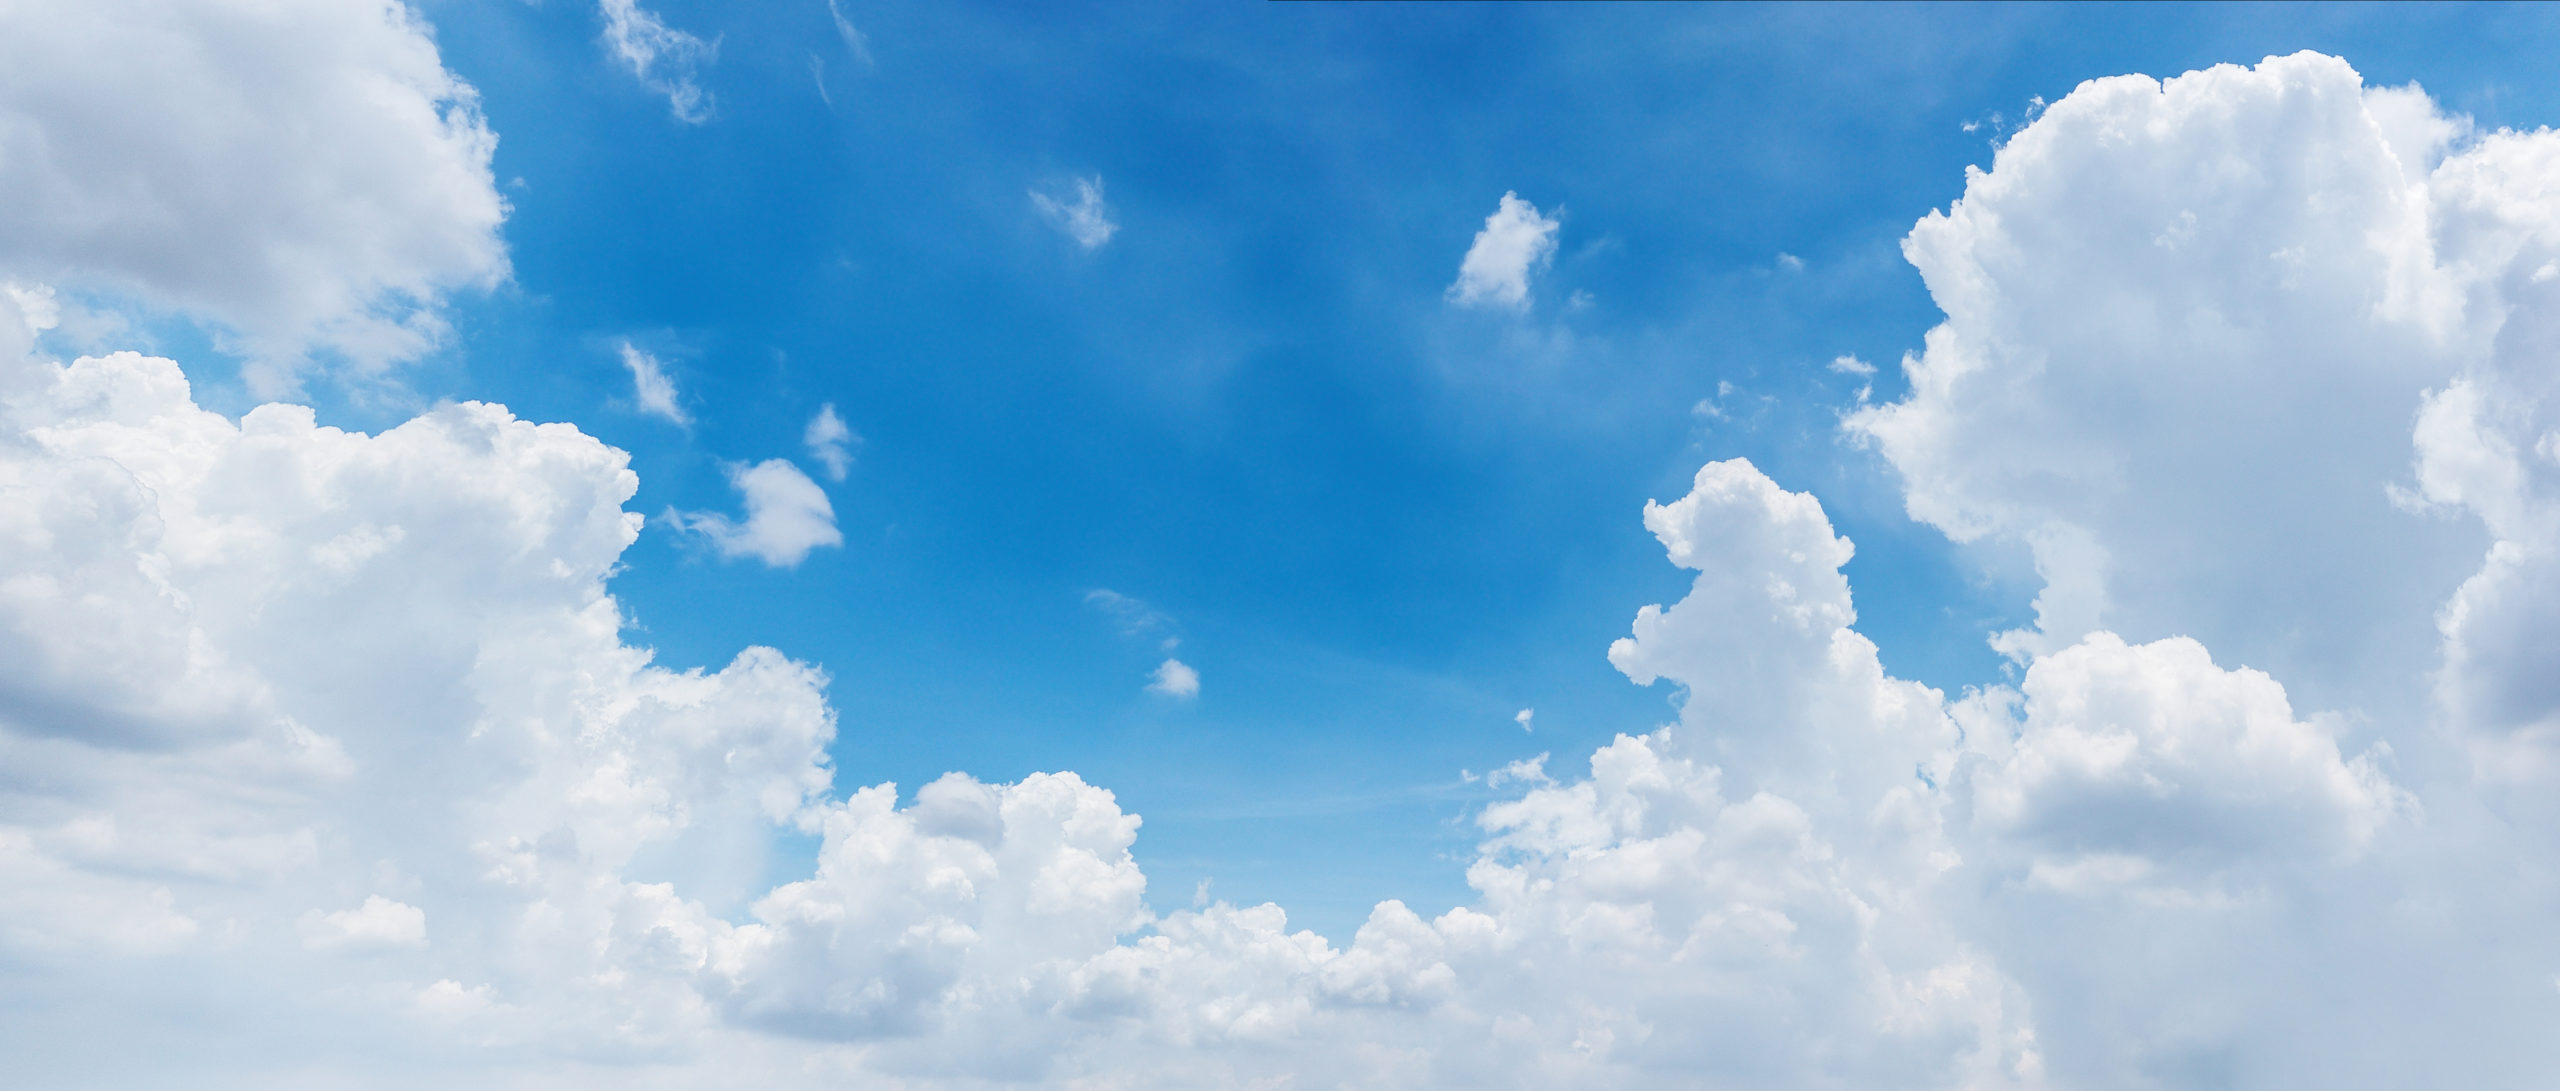 Finding the Right Path to PKI in the Cloud